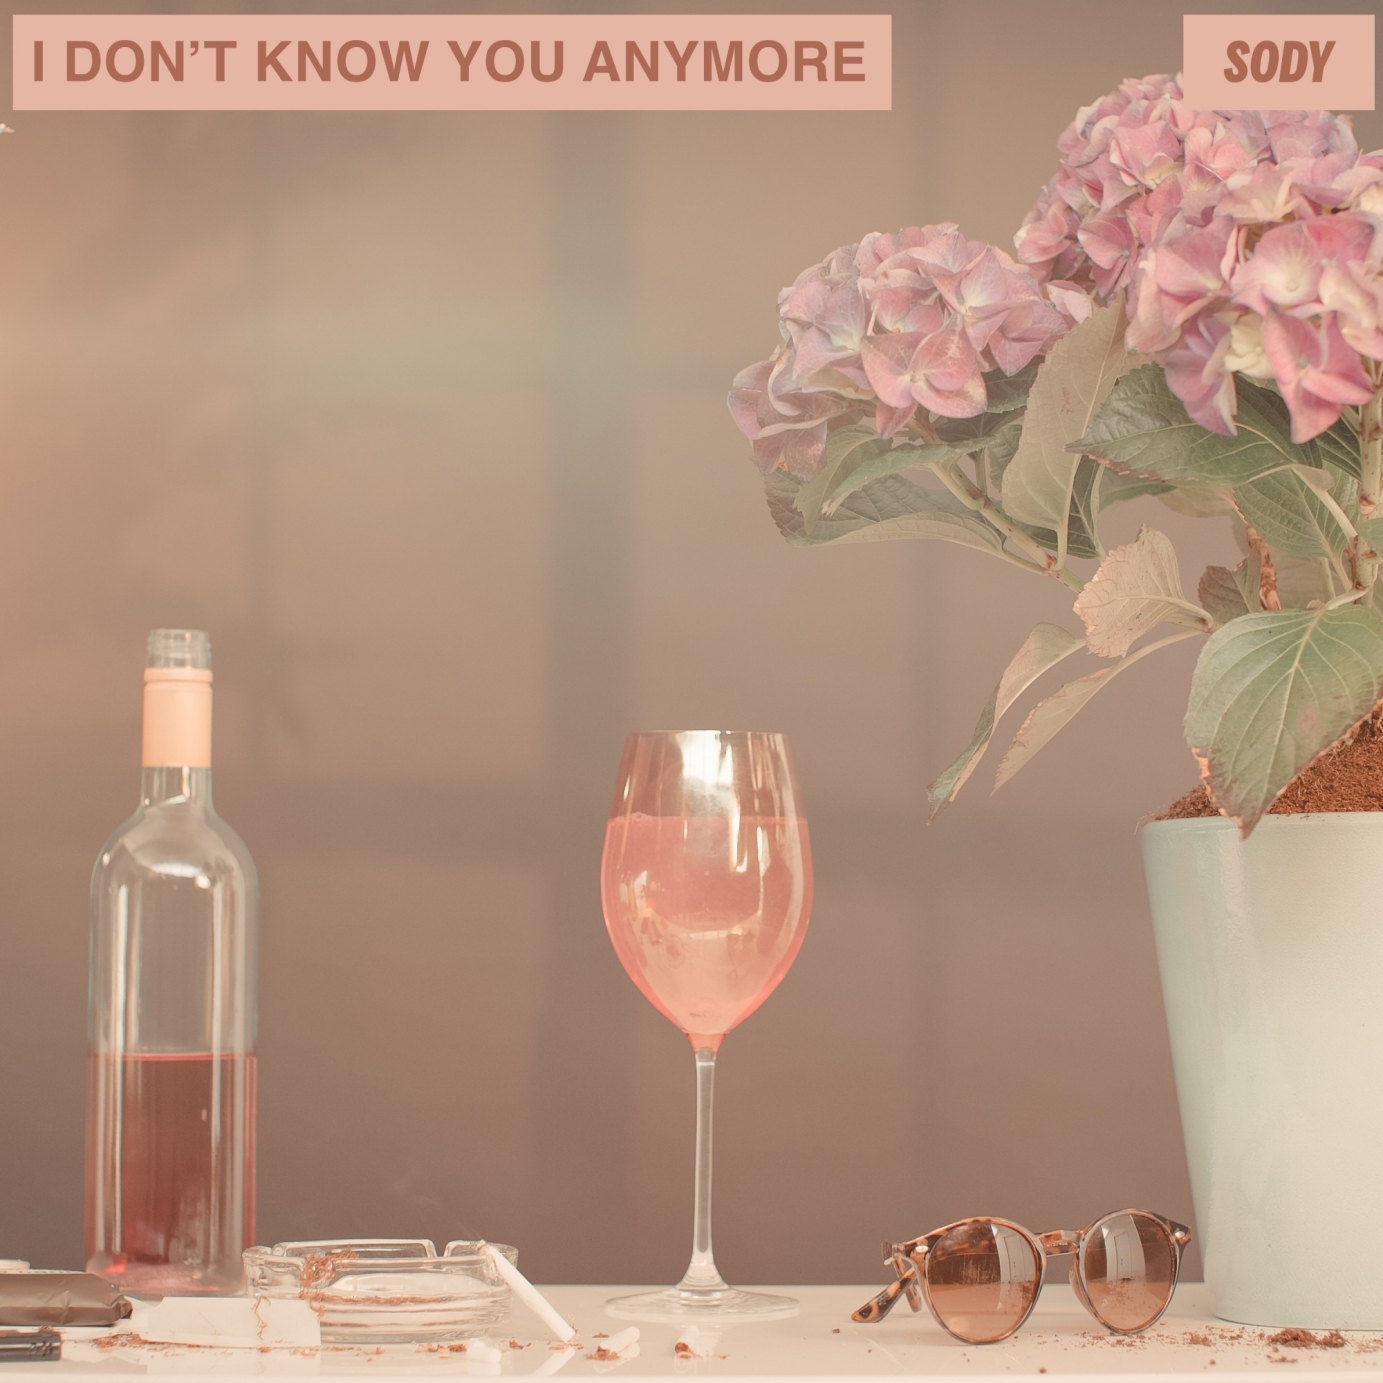 Sody - I Don't Know You Anymore - Single Artwork